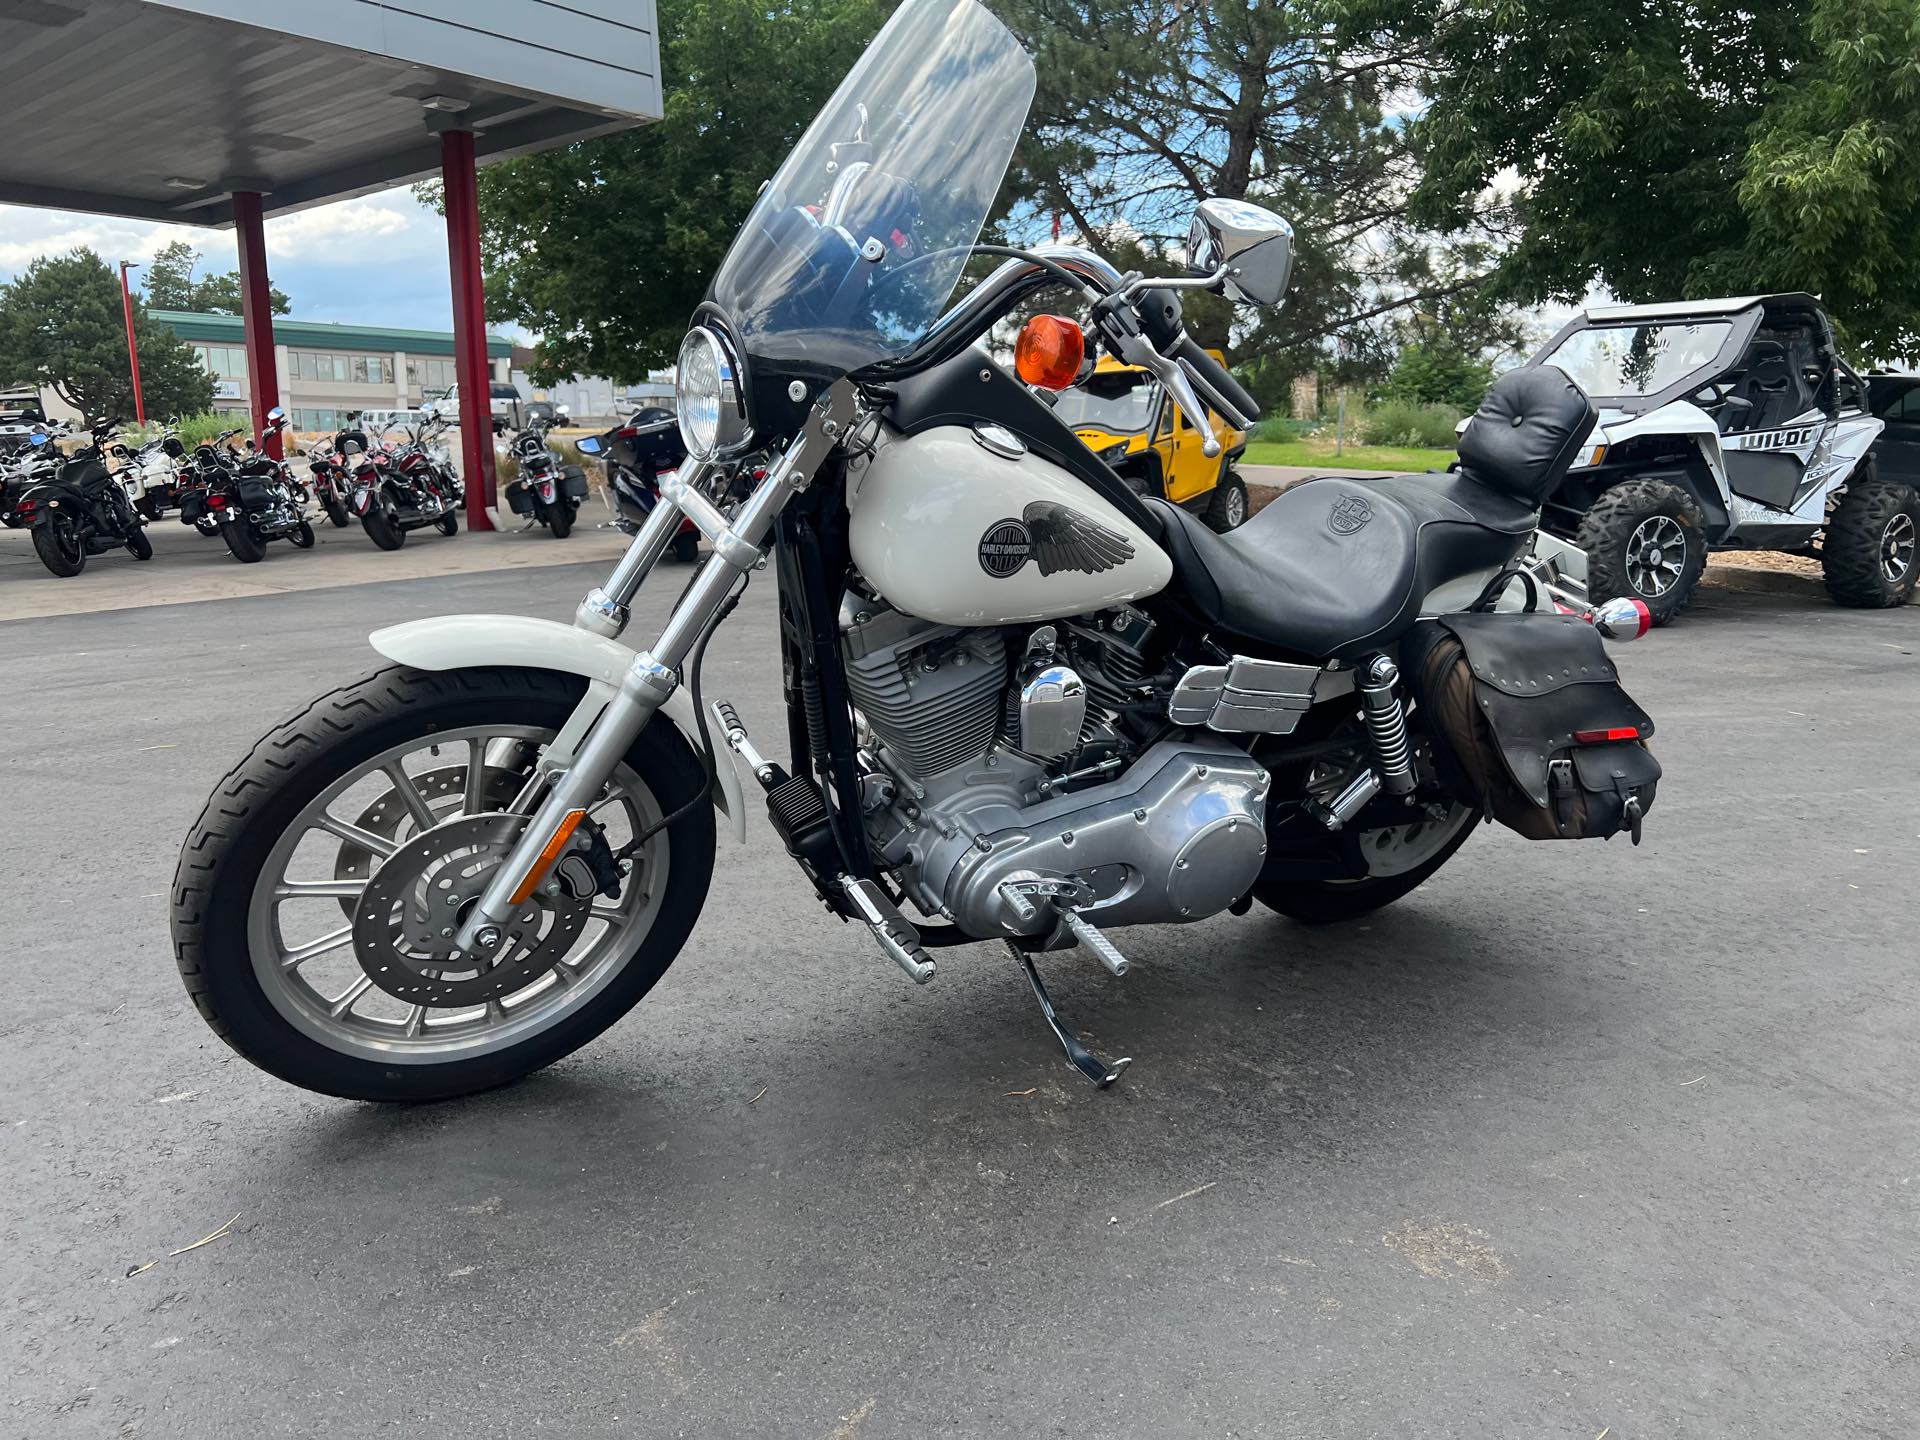 2001 HARLEY DAVIDSON FXDP at Aces Motorcycles - Fort Collins